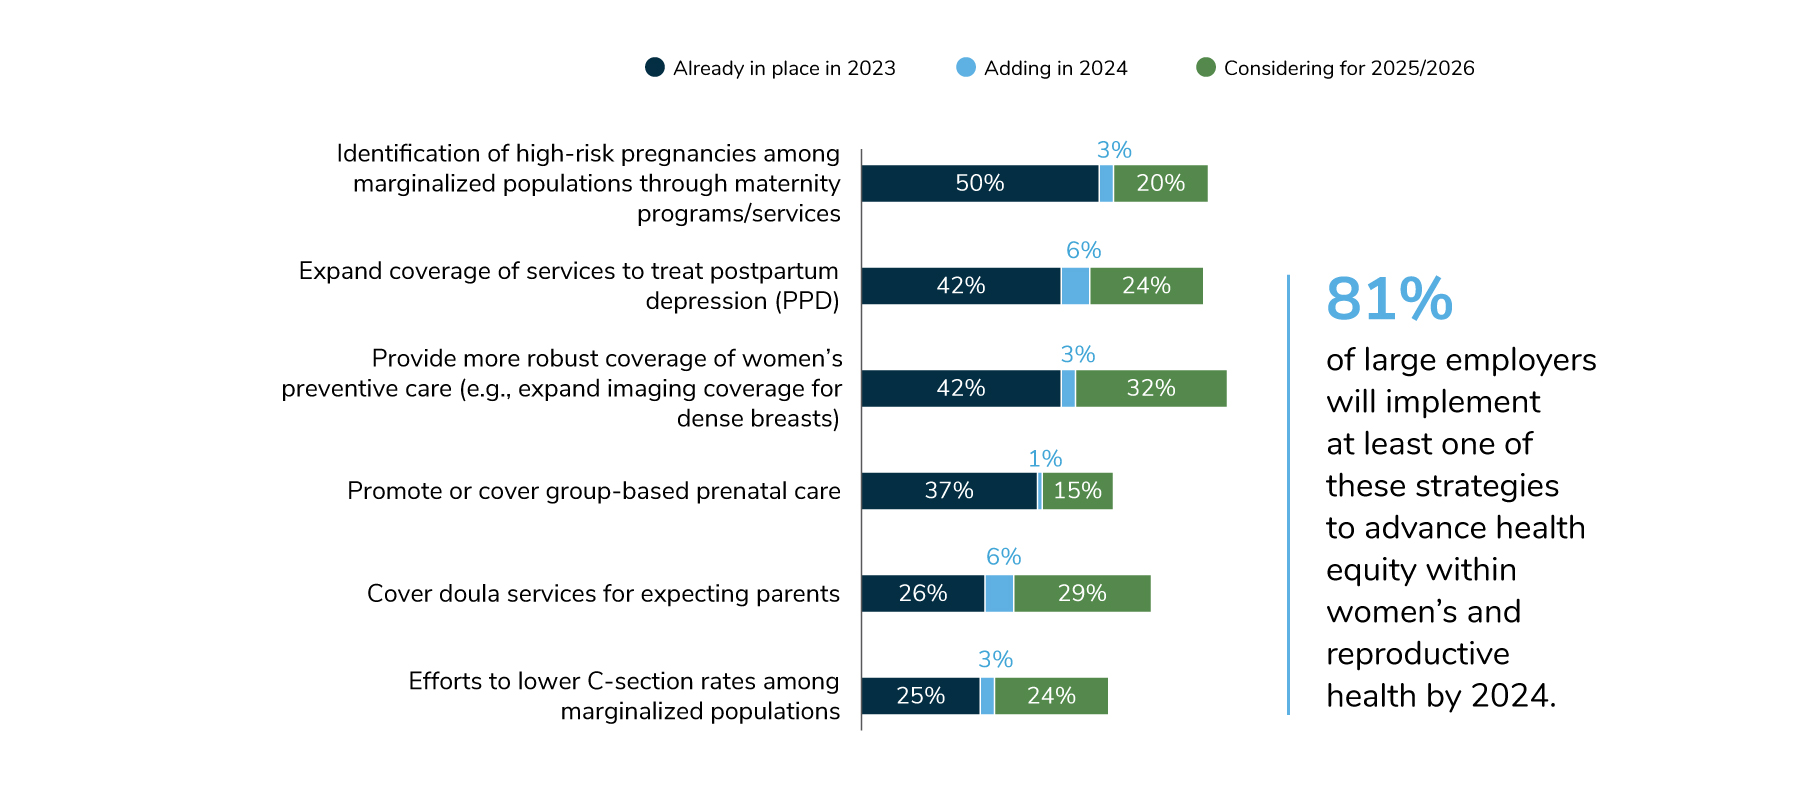 In 2024, 53% of employers will have programs to identify high-risk pregnancies among marginalized populations. 48% will have expanded coverage of services to treat post-partum depression 43% will provide more robust coverage women's preventive care. 38% will promote or cover group-based prenatal care. 32% will cover doula services for expecting parents. 28% will have efforts in place to lower C-section rates among marginalized populations.